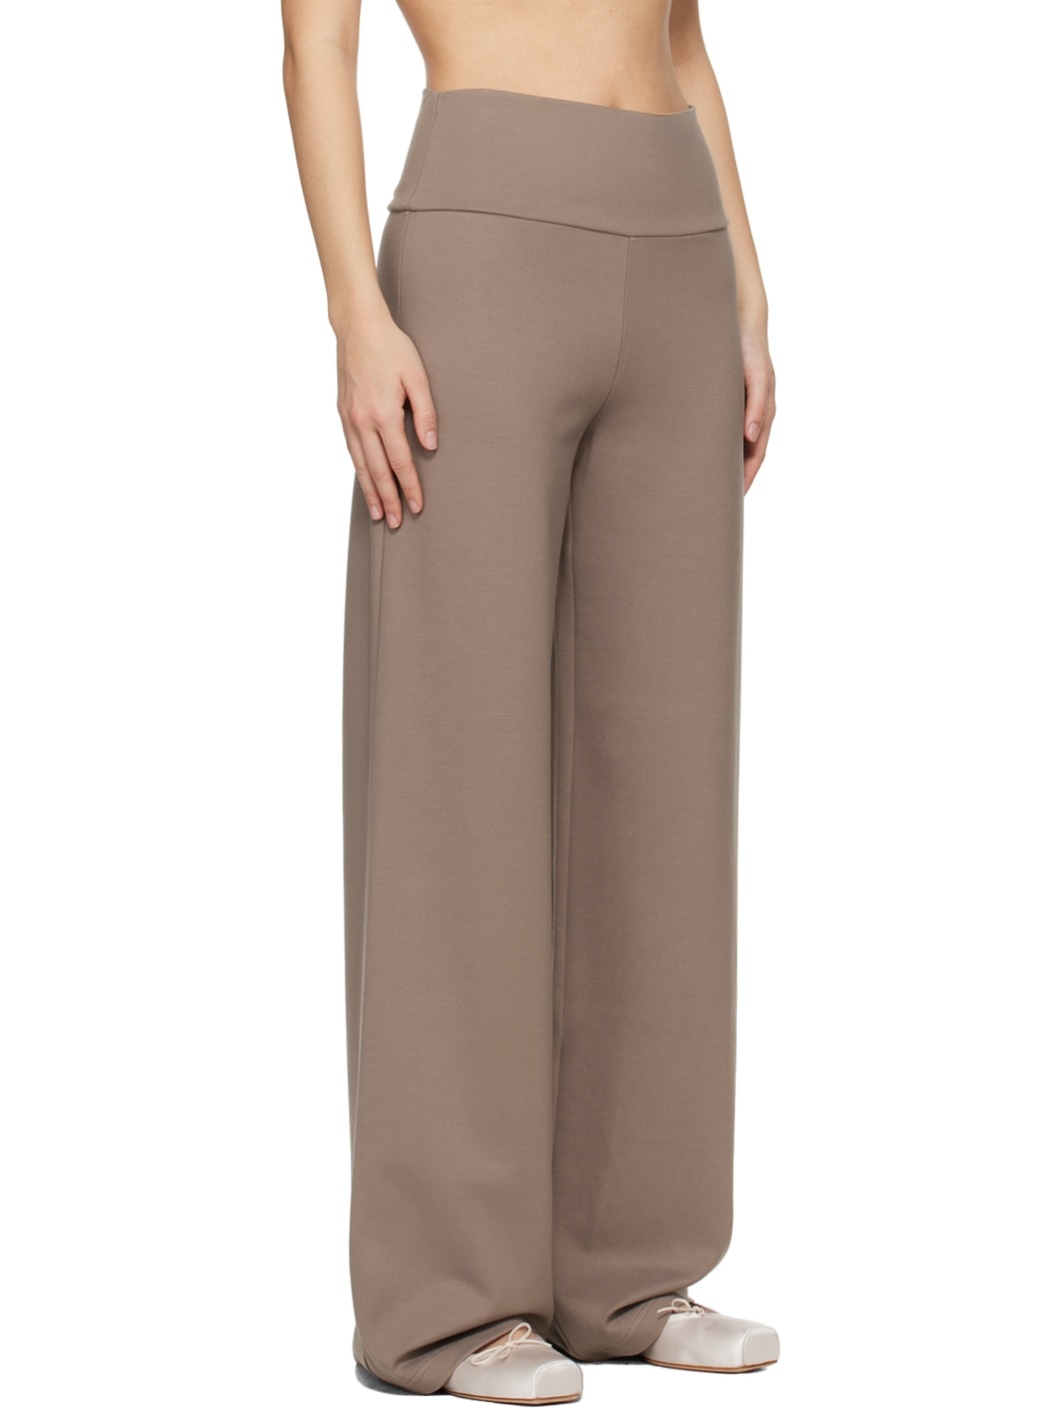 SSENSE Exclusive Taupe 'Elemental by Paris Georgia' Everyday Lounge Pants - 2